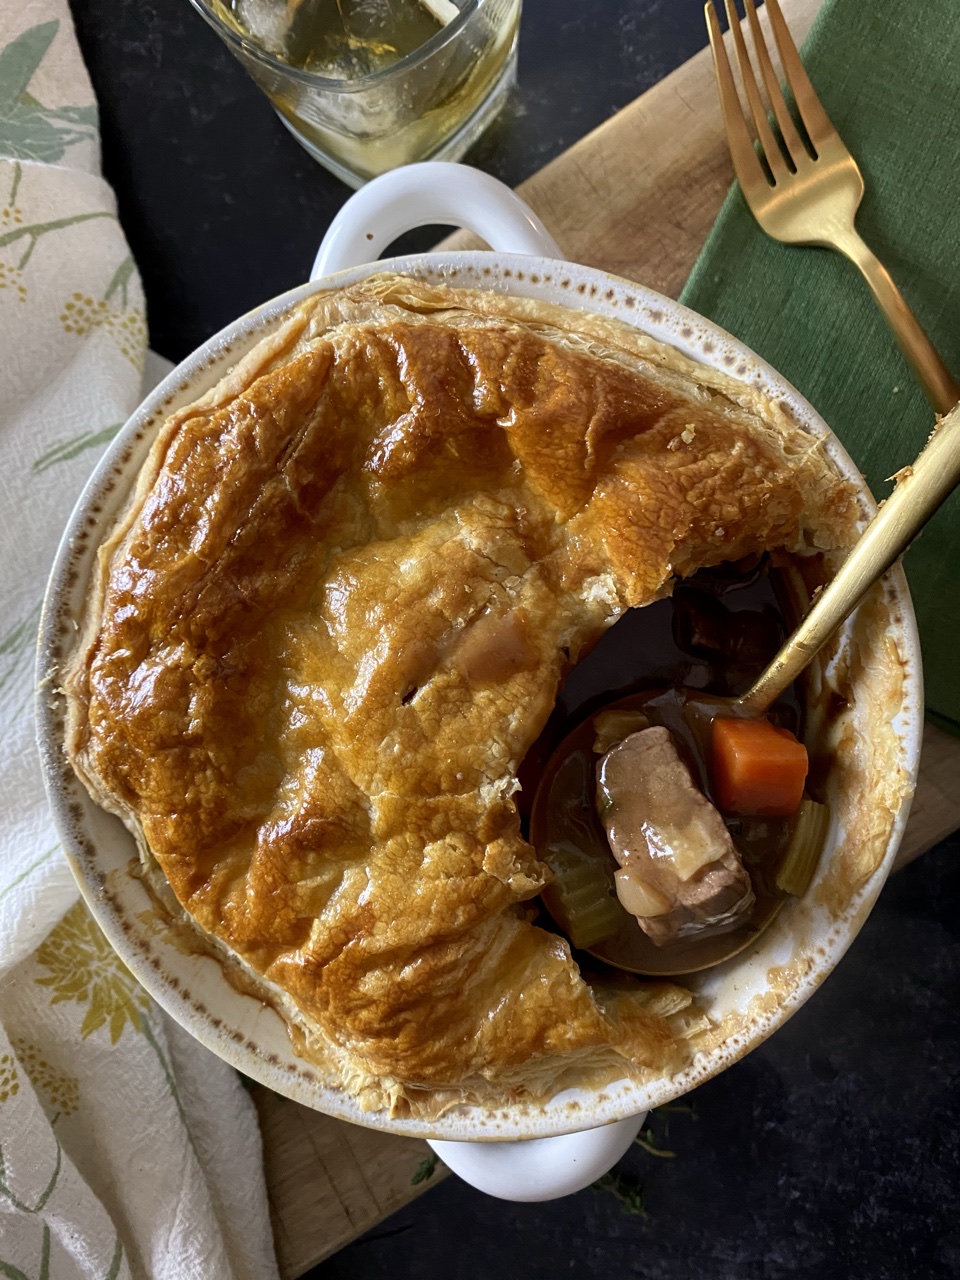 FCF4185F 301C 4C03 9124 D6DB78009A02 - The Best Pub-Style Beef & Guinness Pie